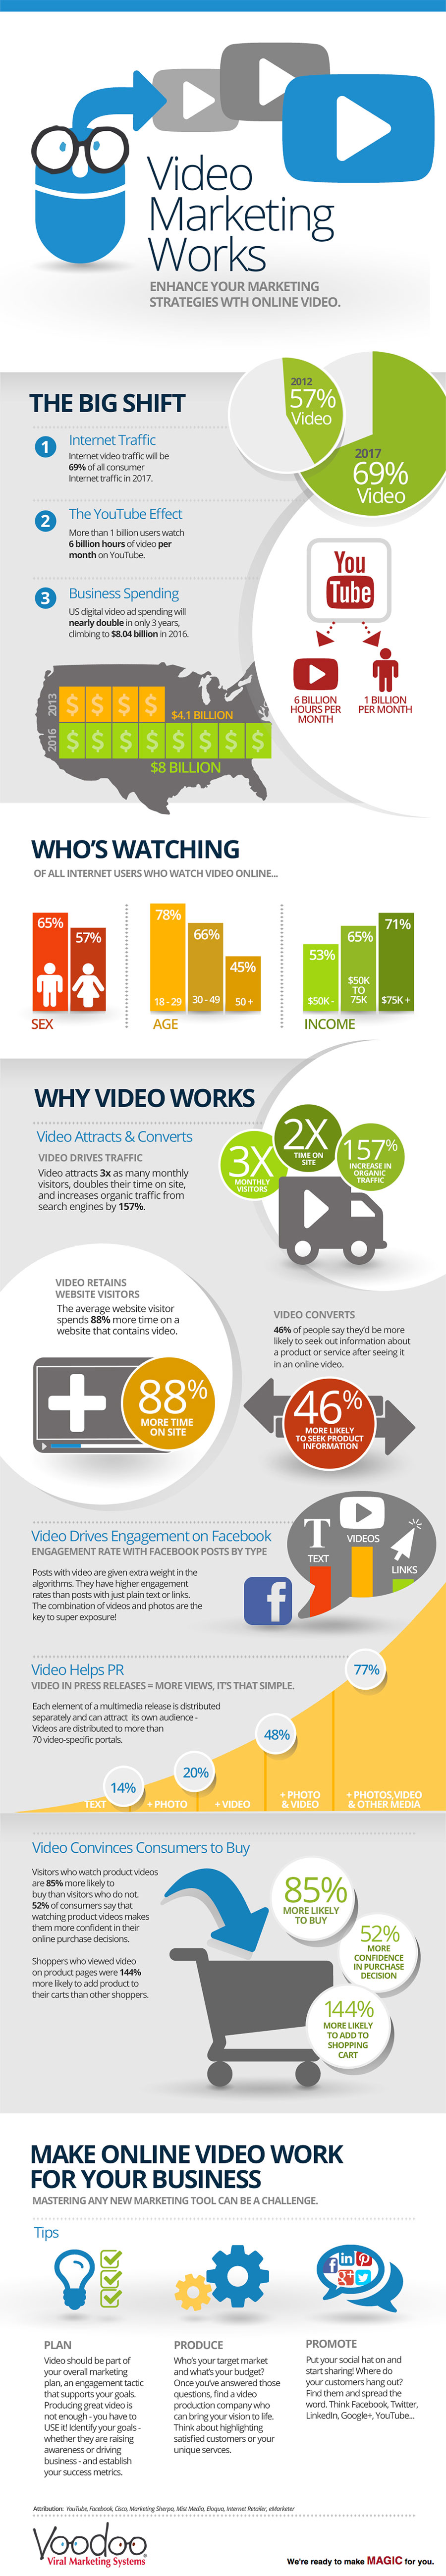 Video InfoGraphic January 2014